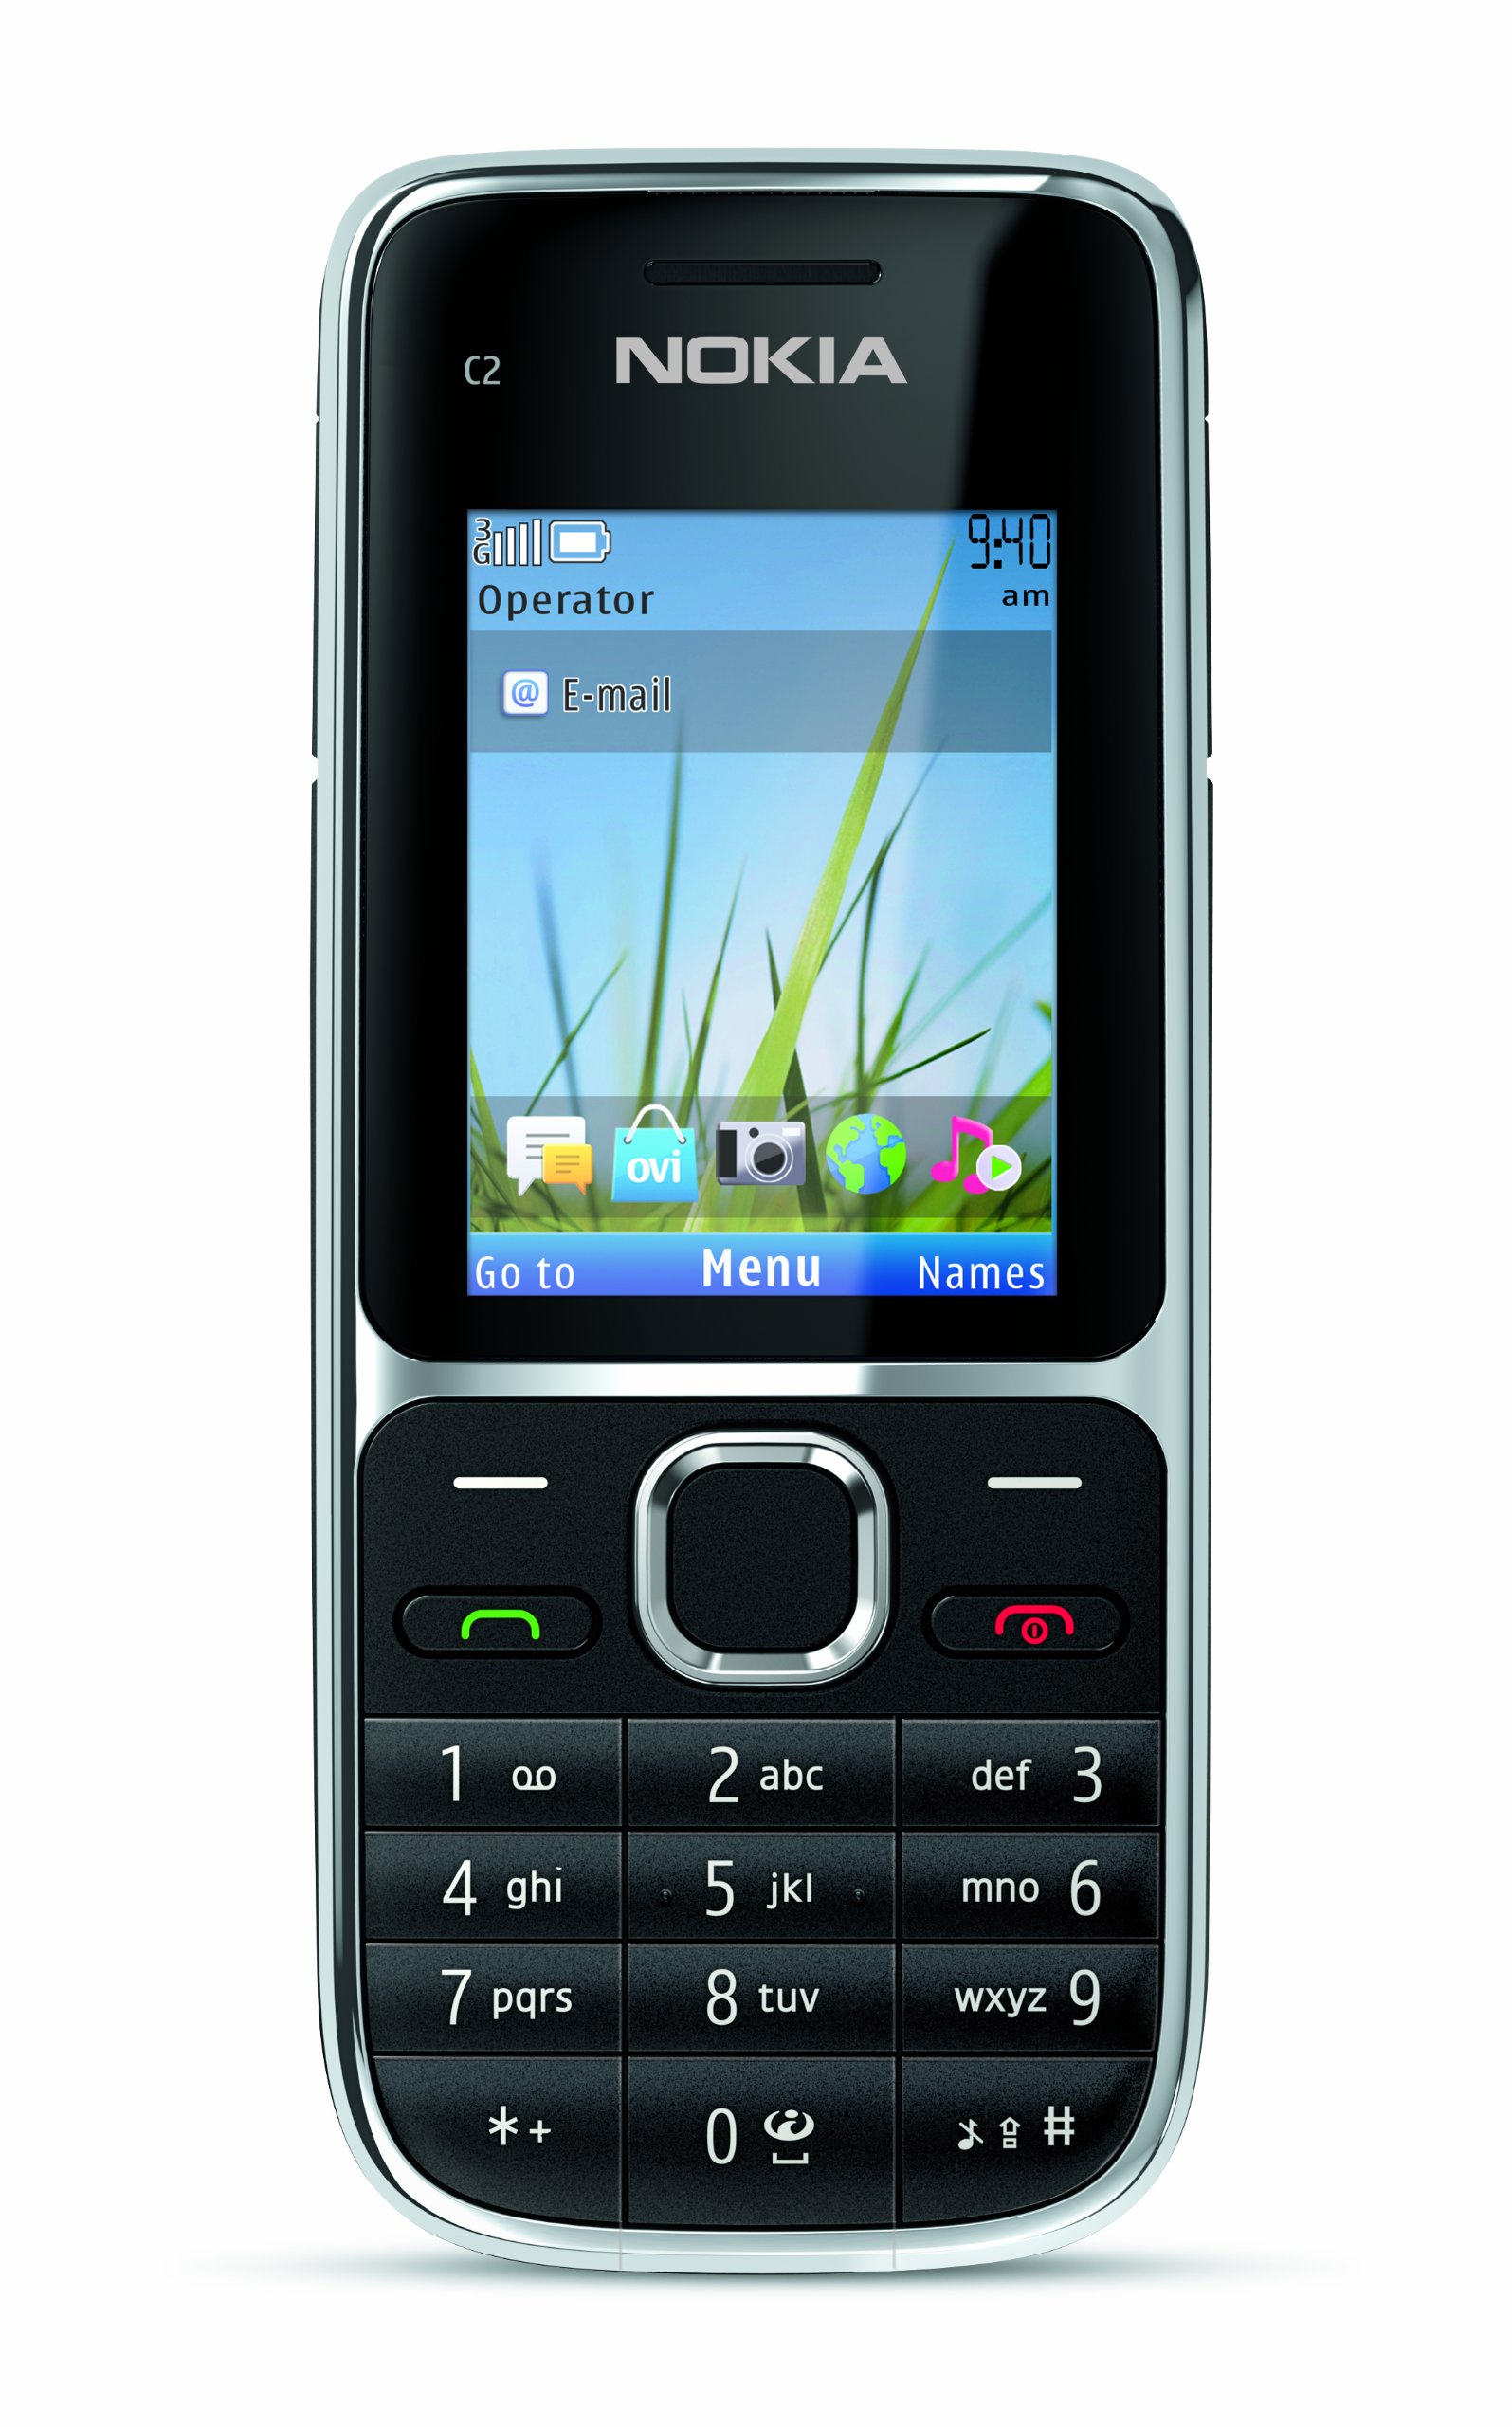 Nokia C2-01.5 Unlocked GSM Phone with 3.2 MP Camera and Music and Video Player--U.S. Version with Warranty (Black)